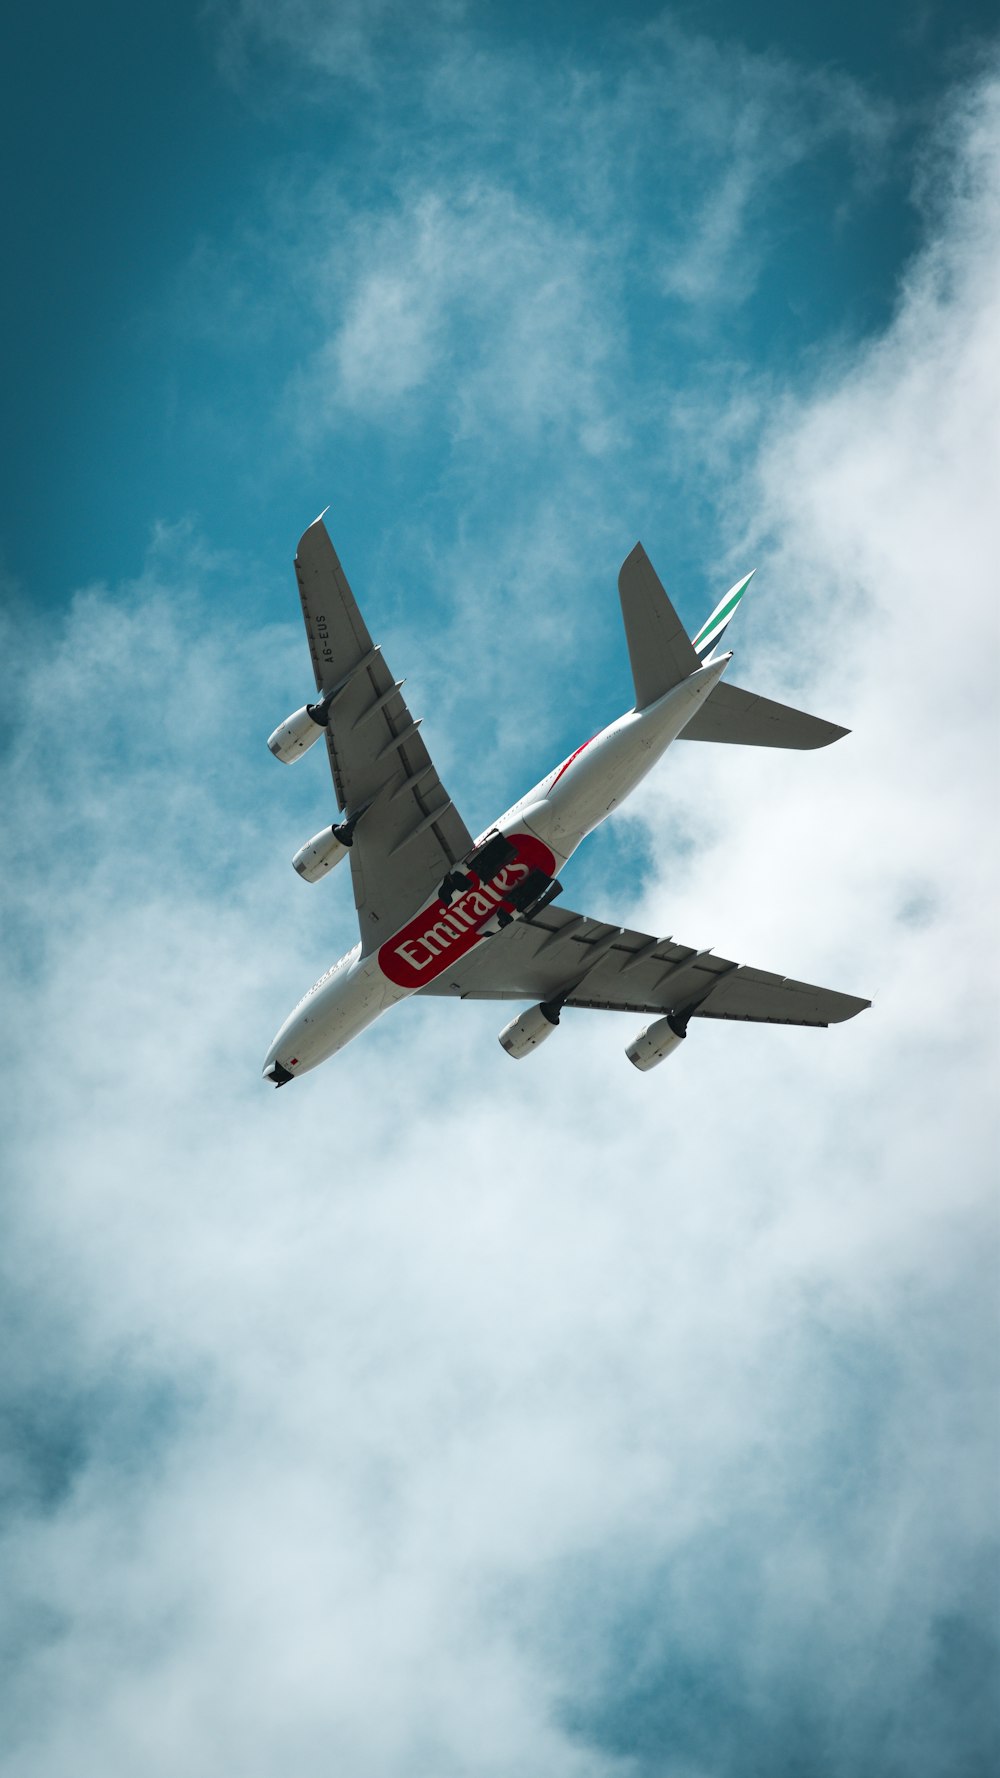 a large jetliner flying through a cloudy blue sky